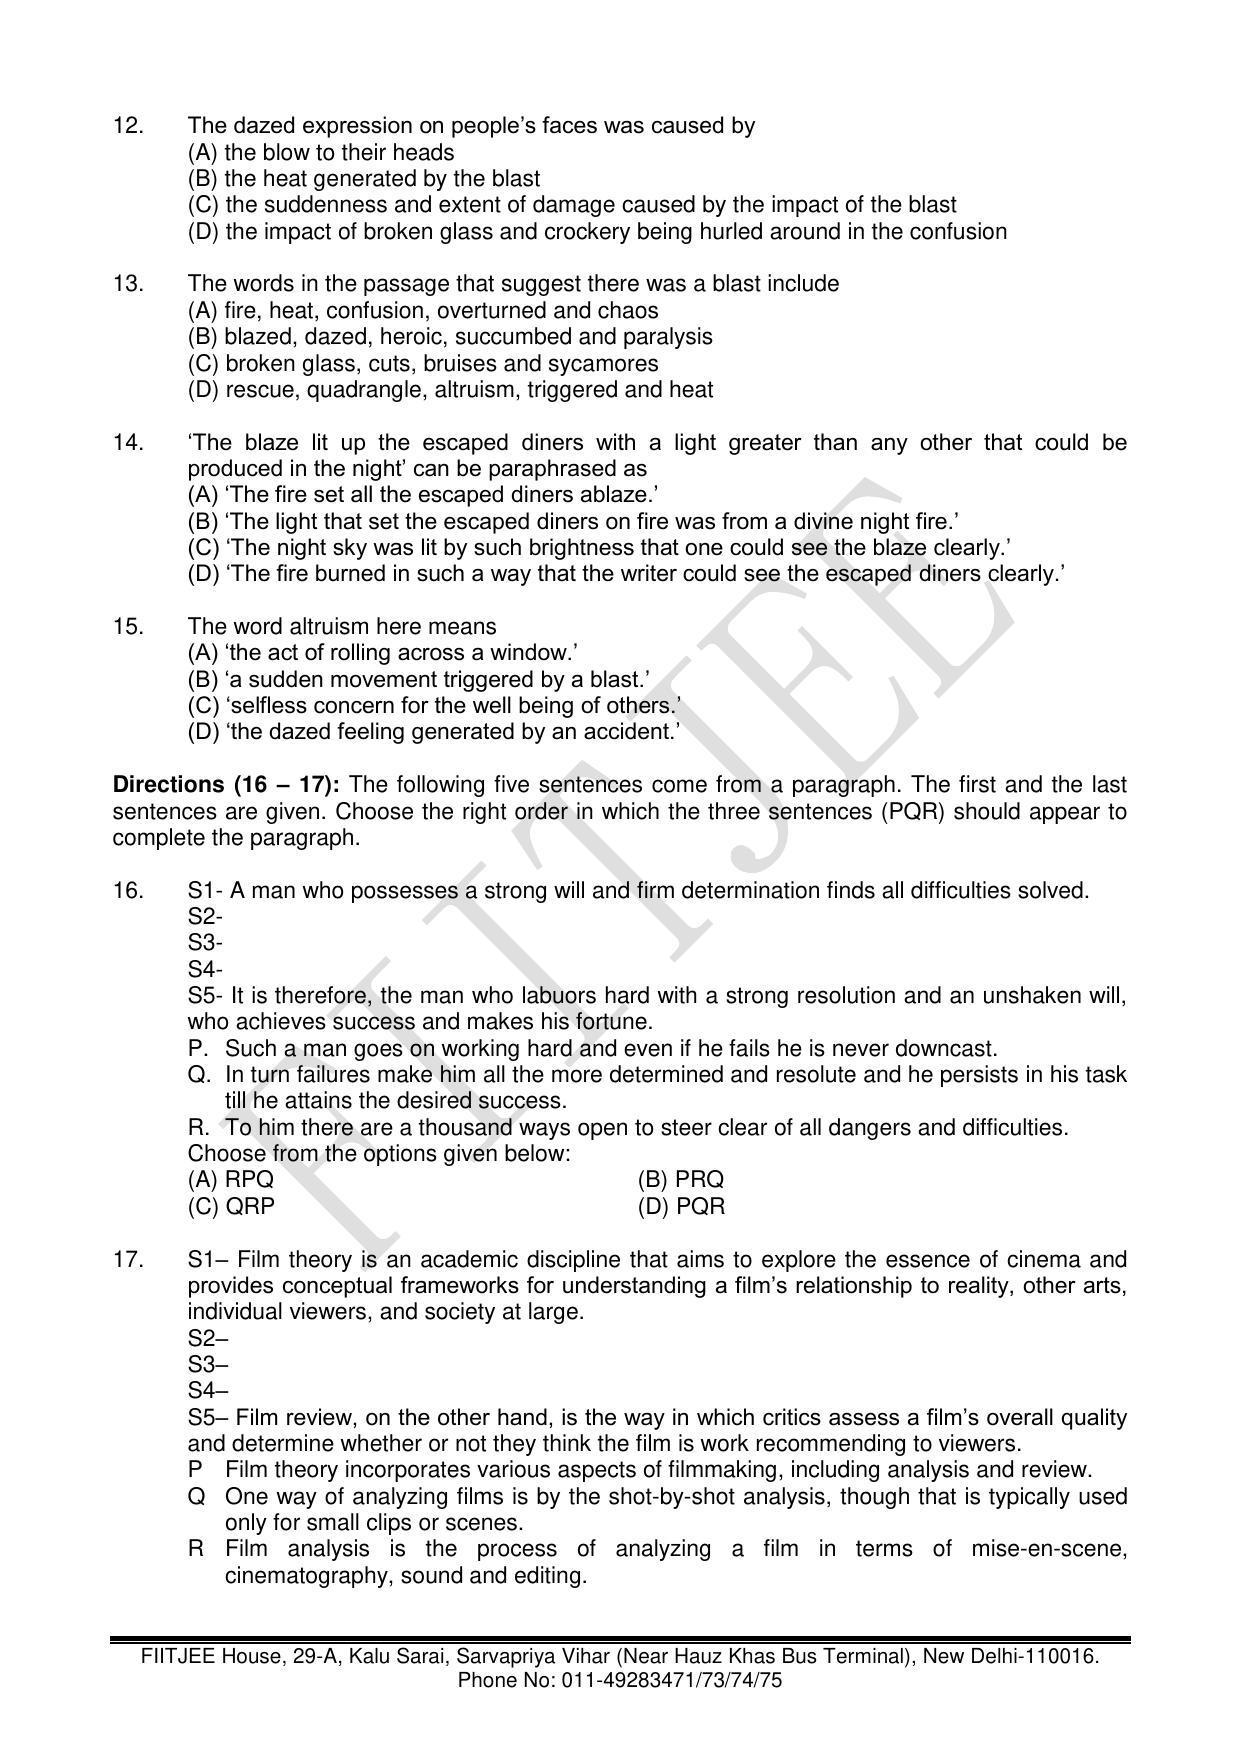 NTSE 2017 (Stage II) Language (LCT) Question Paper (May 14, 2017) - Page 4